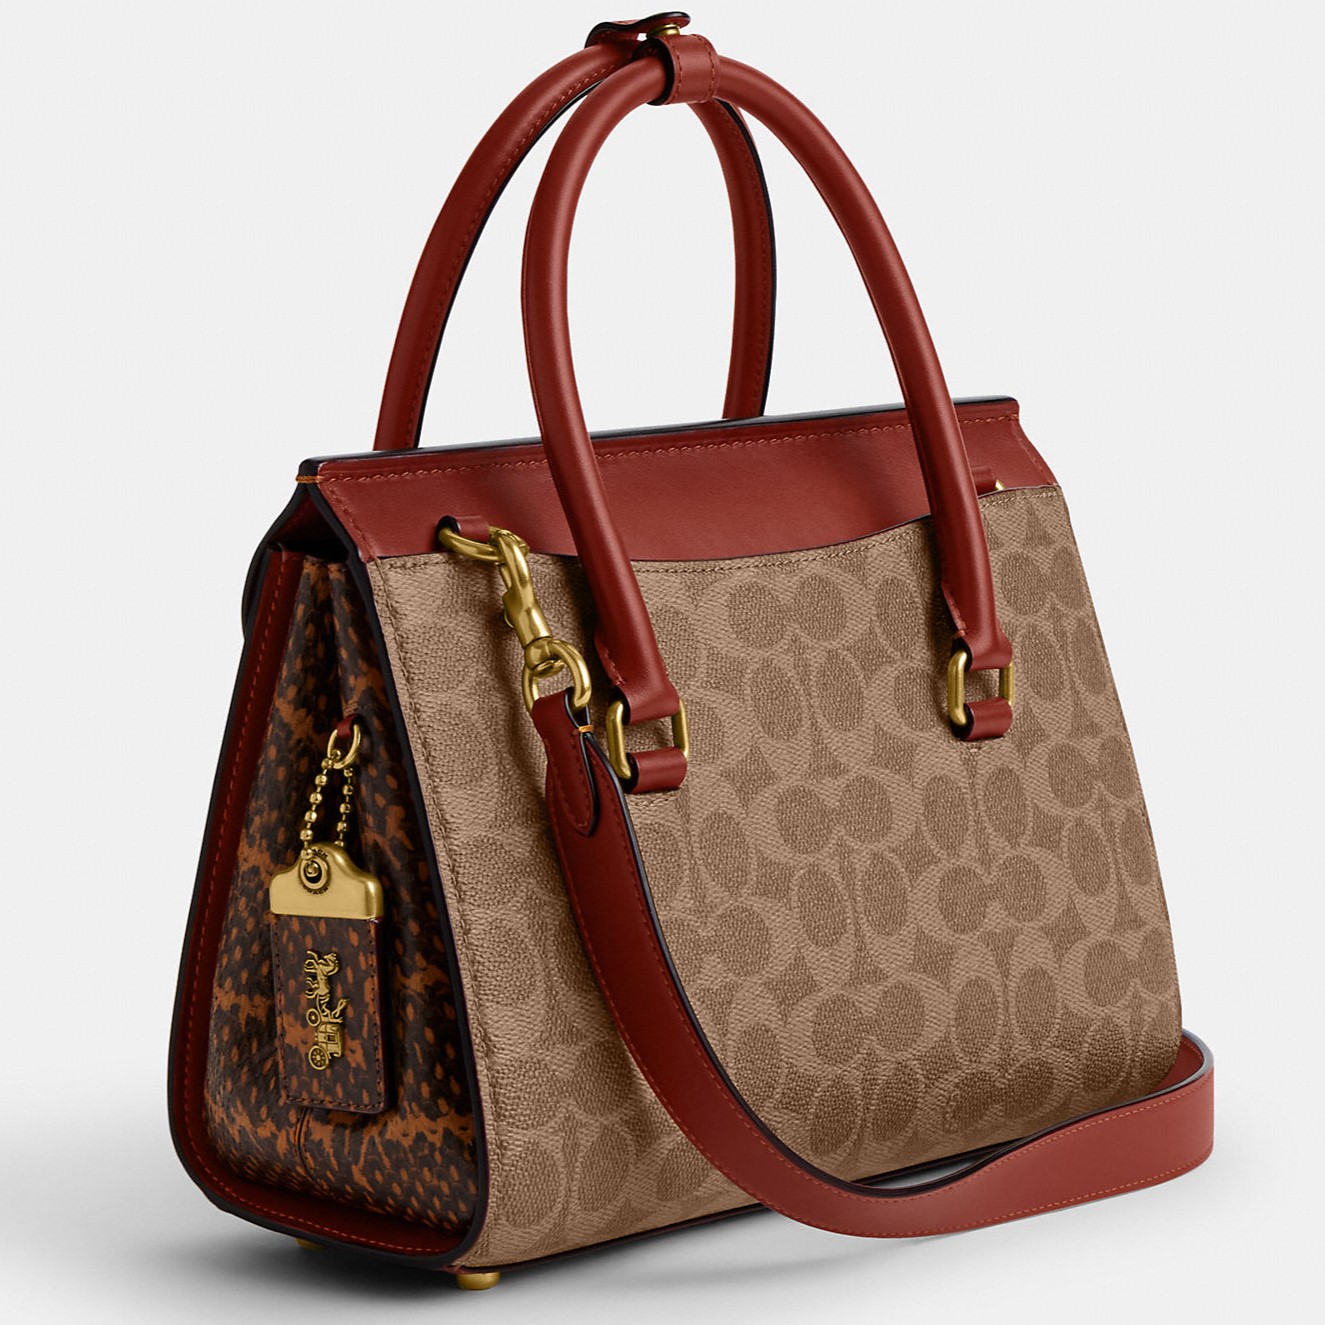 TÚI XÁCH COACH NỮ BROOME CARRYALL IN SIGNATURE COATED CANVAS WITH SNAKESKIN DETAIL CP449 4